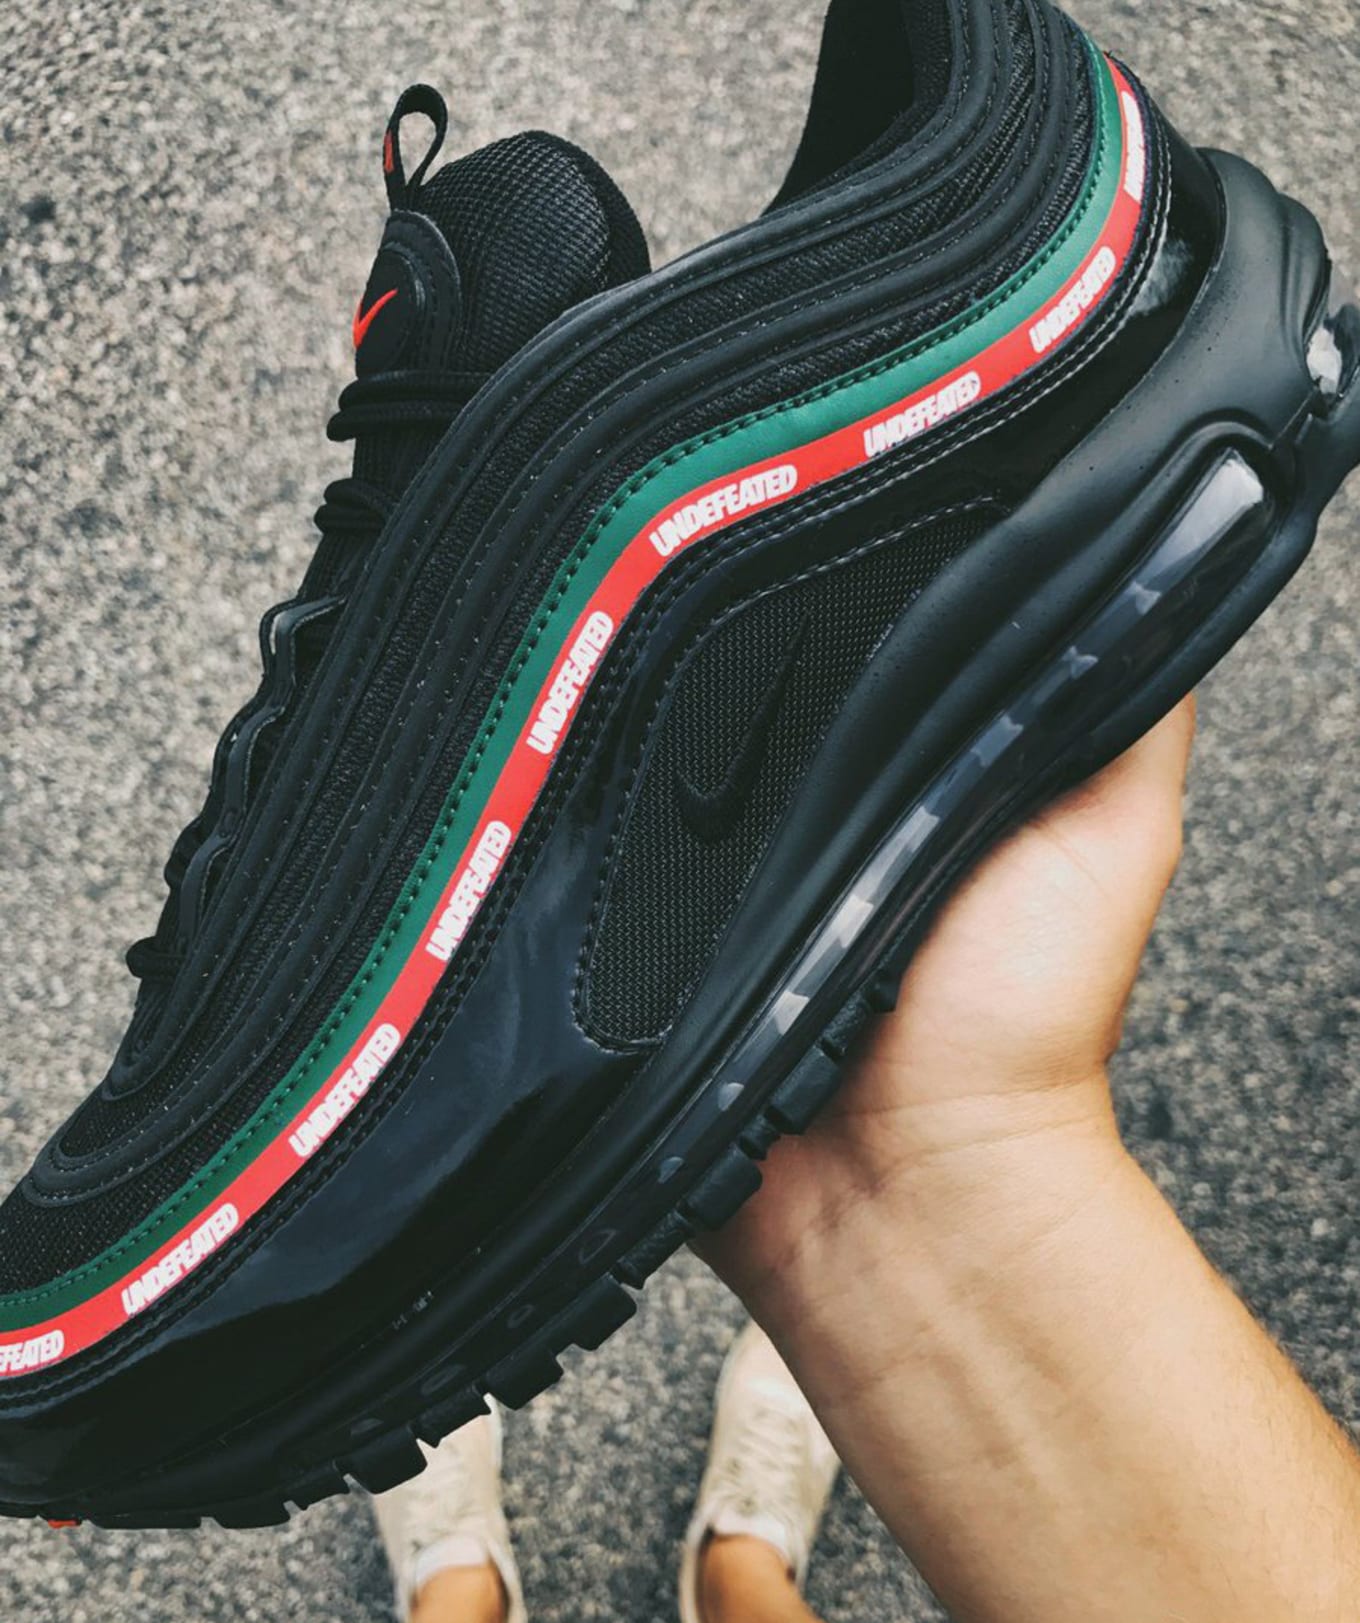 Undefeated x Nike Air Max 97 Three Colorways September 2017 